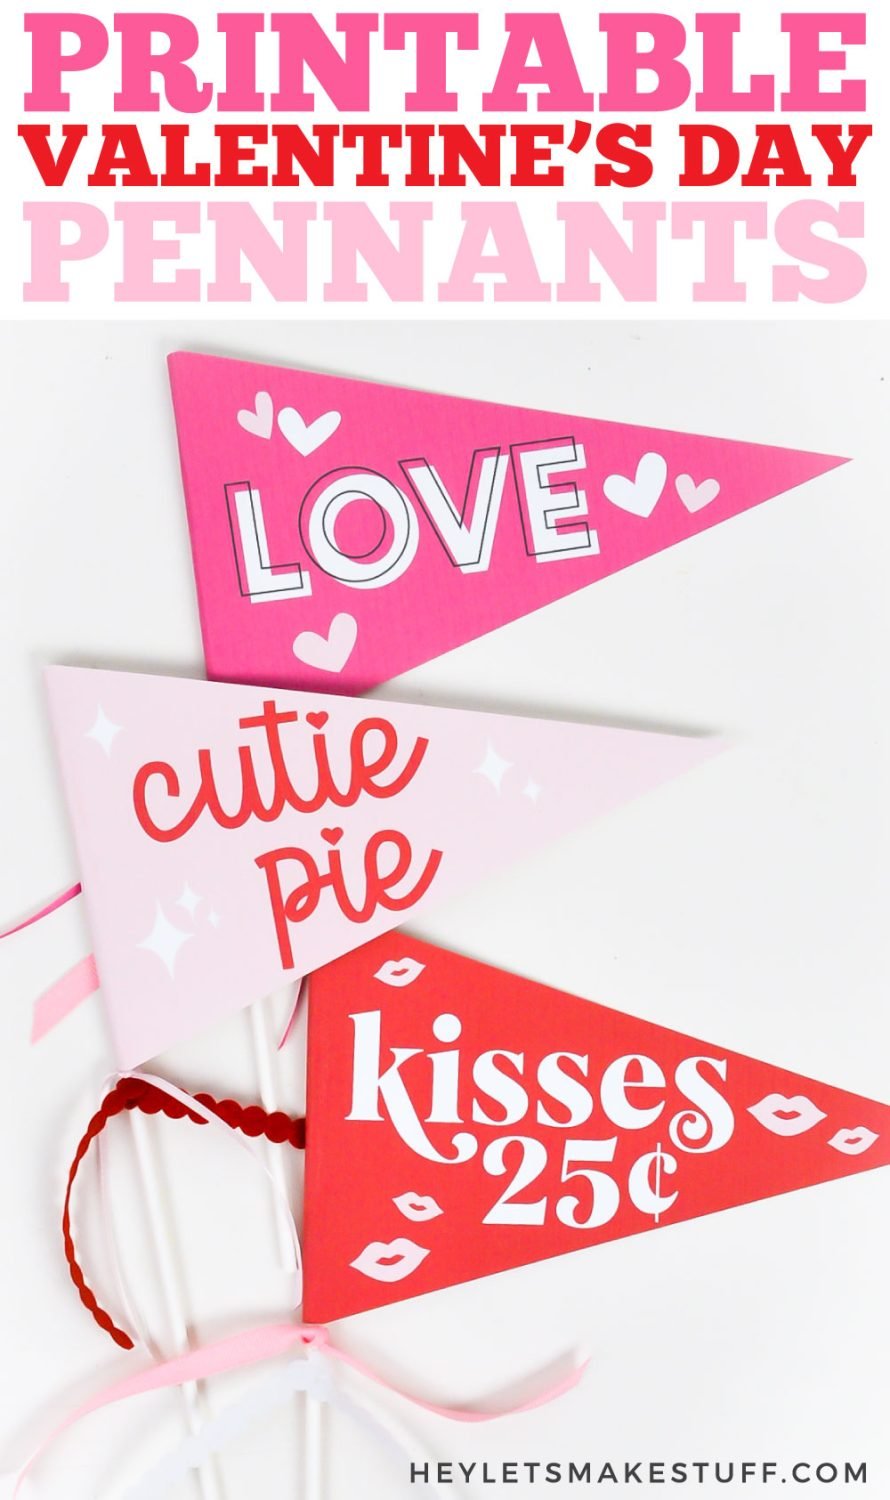 Valentine's Day Pennants pin image